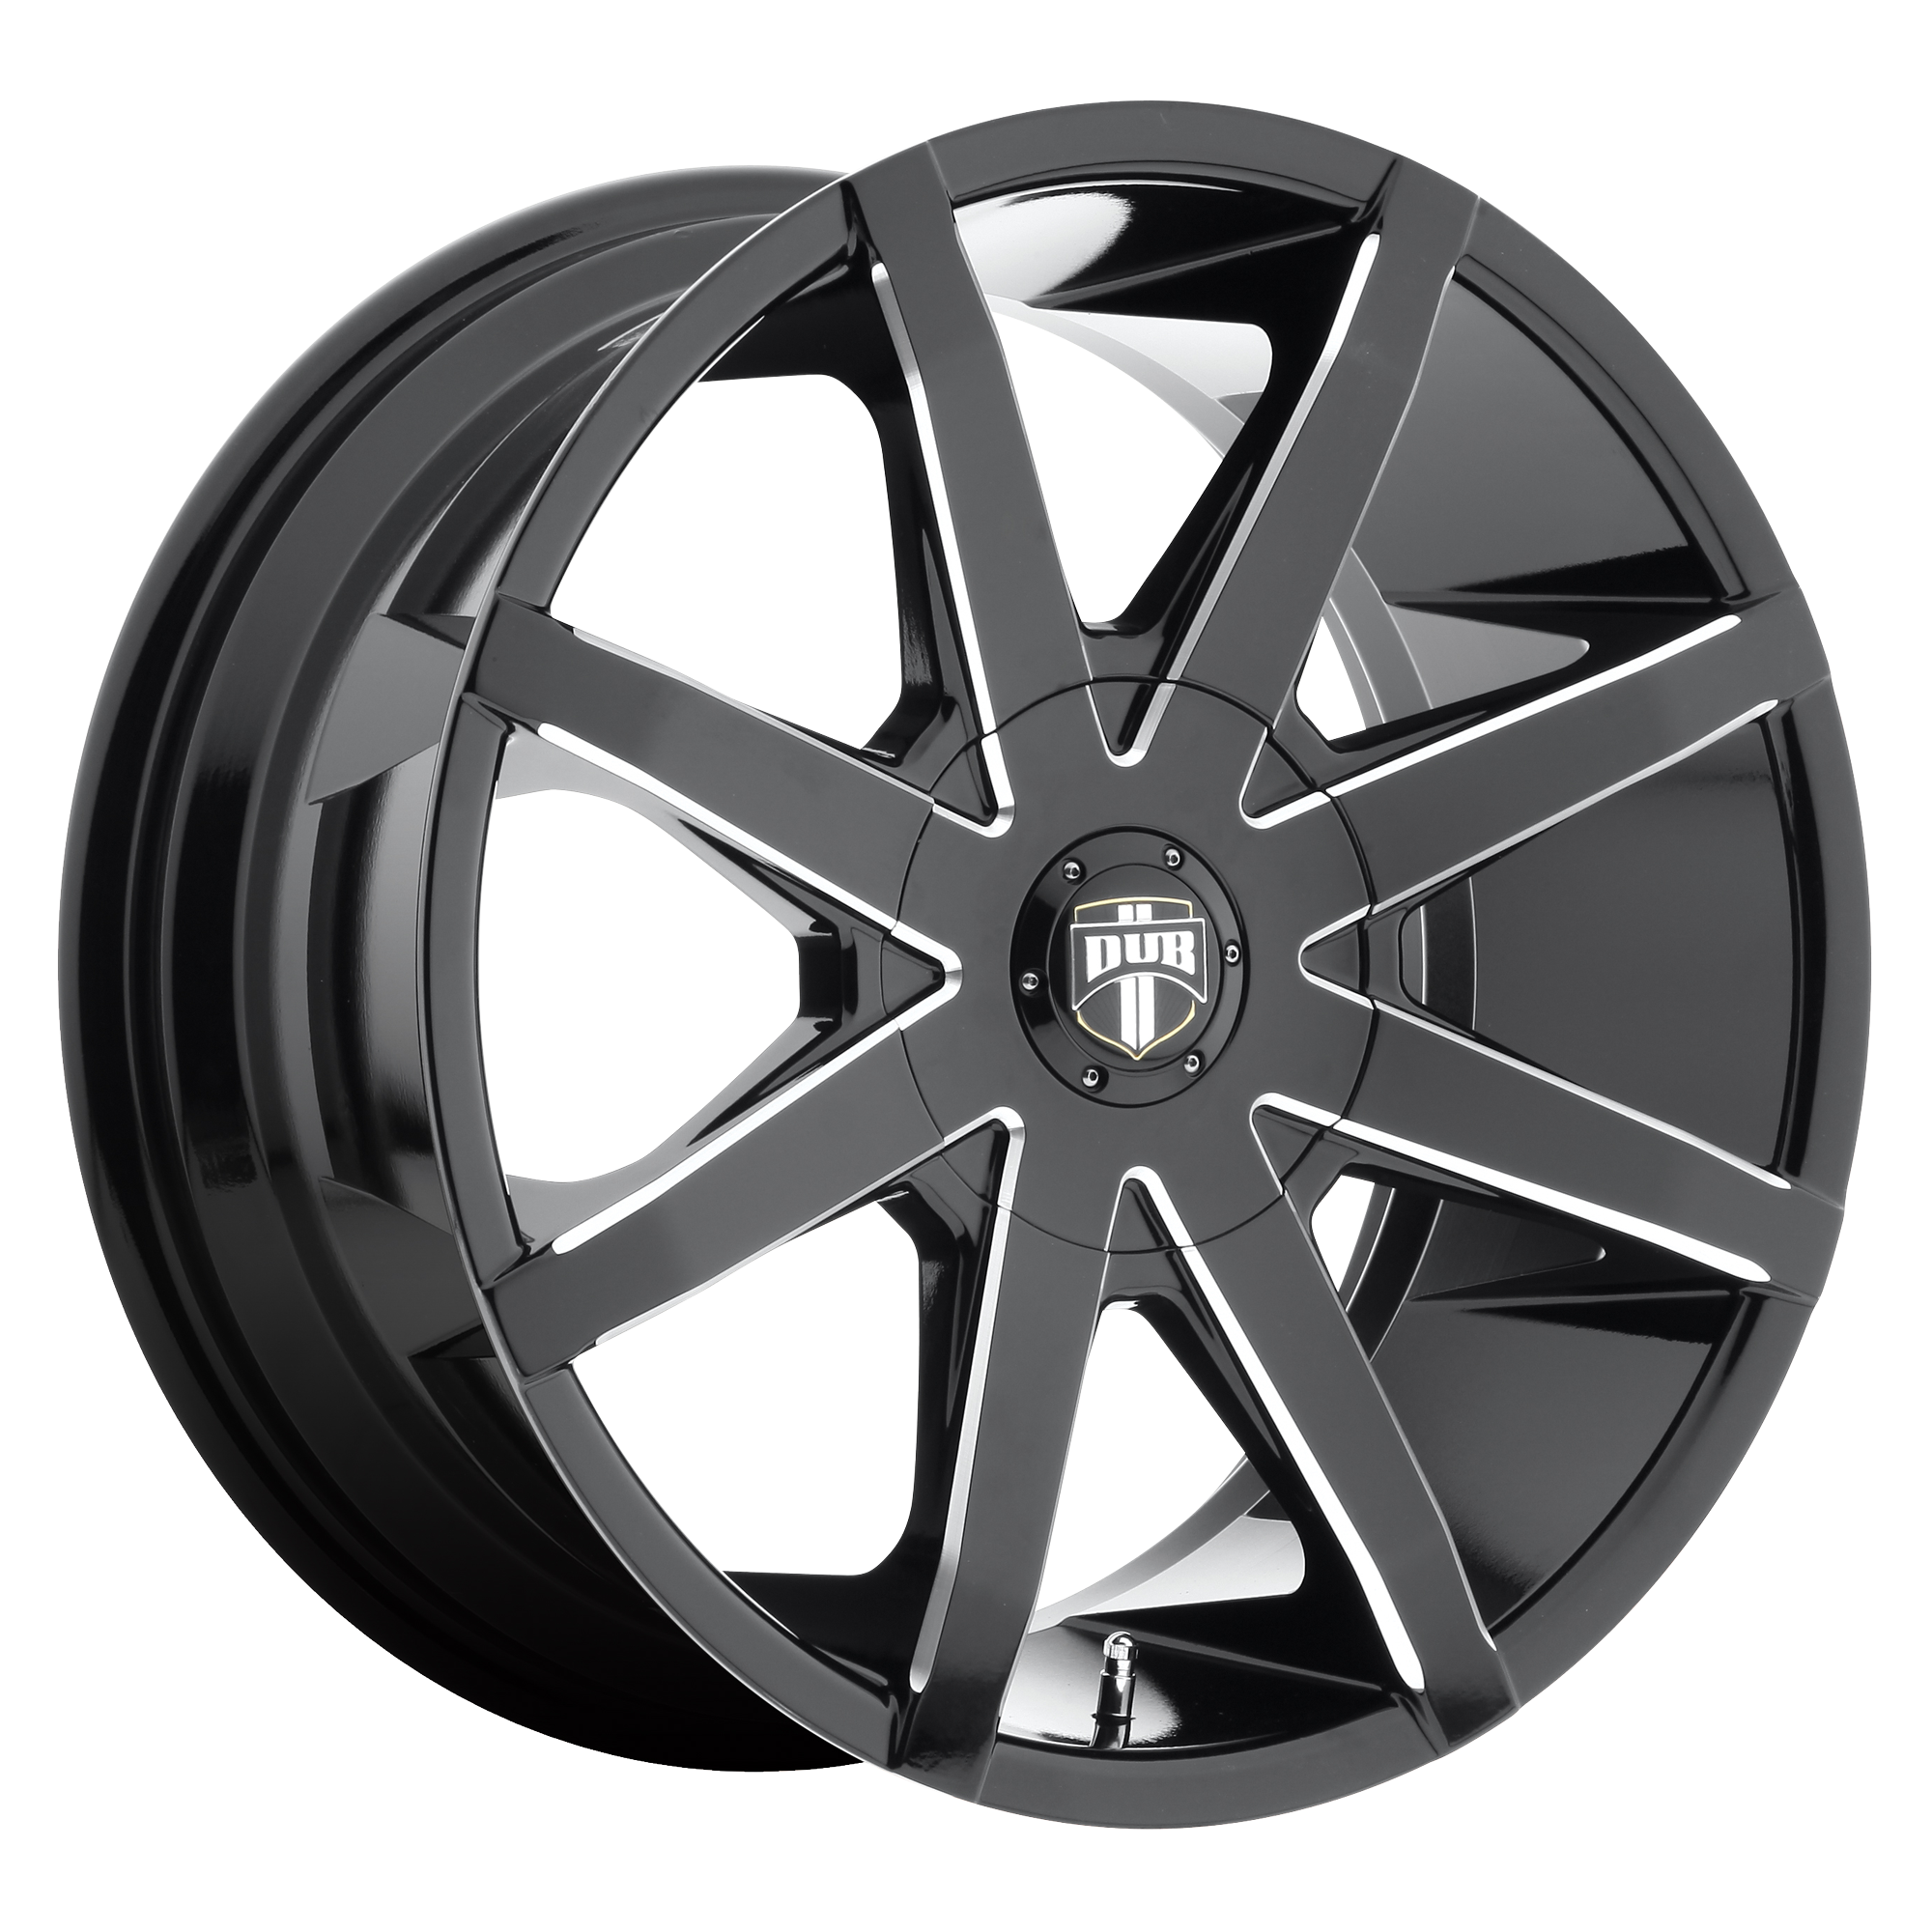 PUSH 22x9.5 5x114.30/5x120.00 GLOSS BLACK MILLED (32 mm) - Tires and Engine Performance